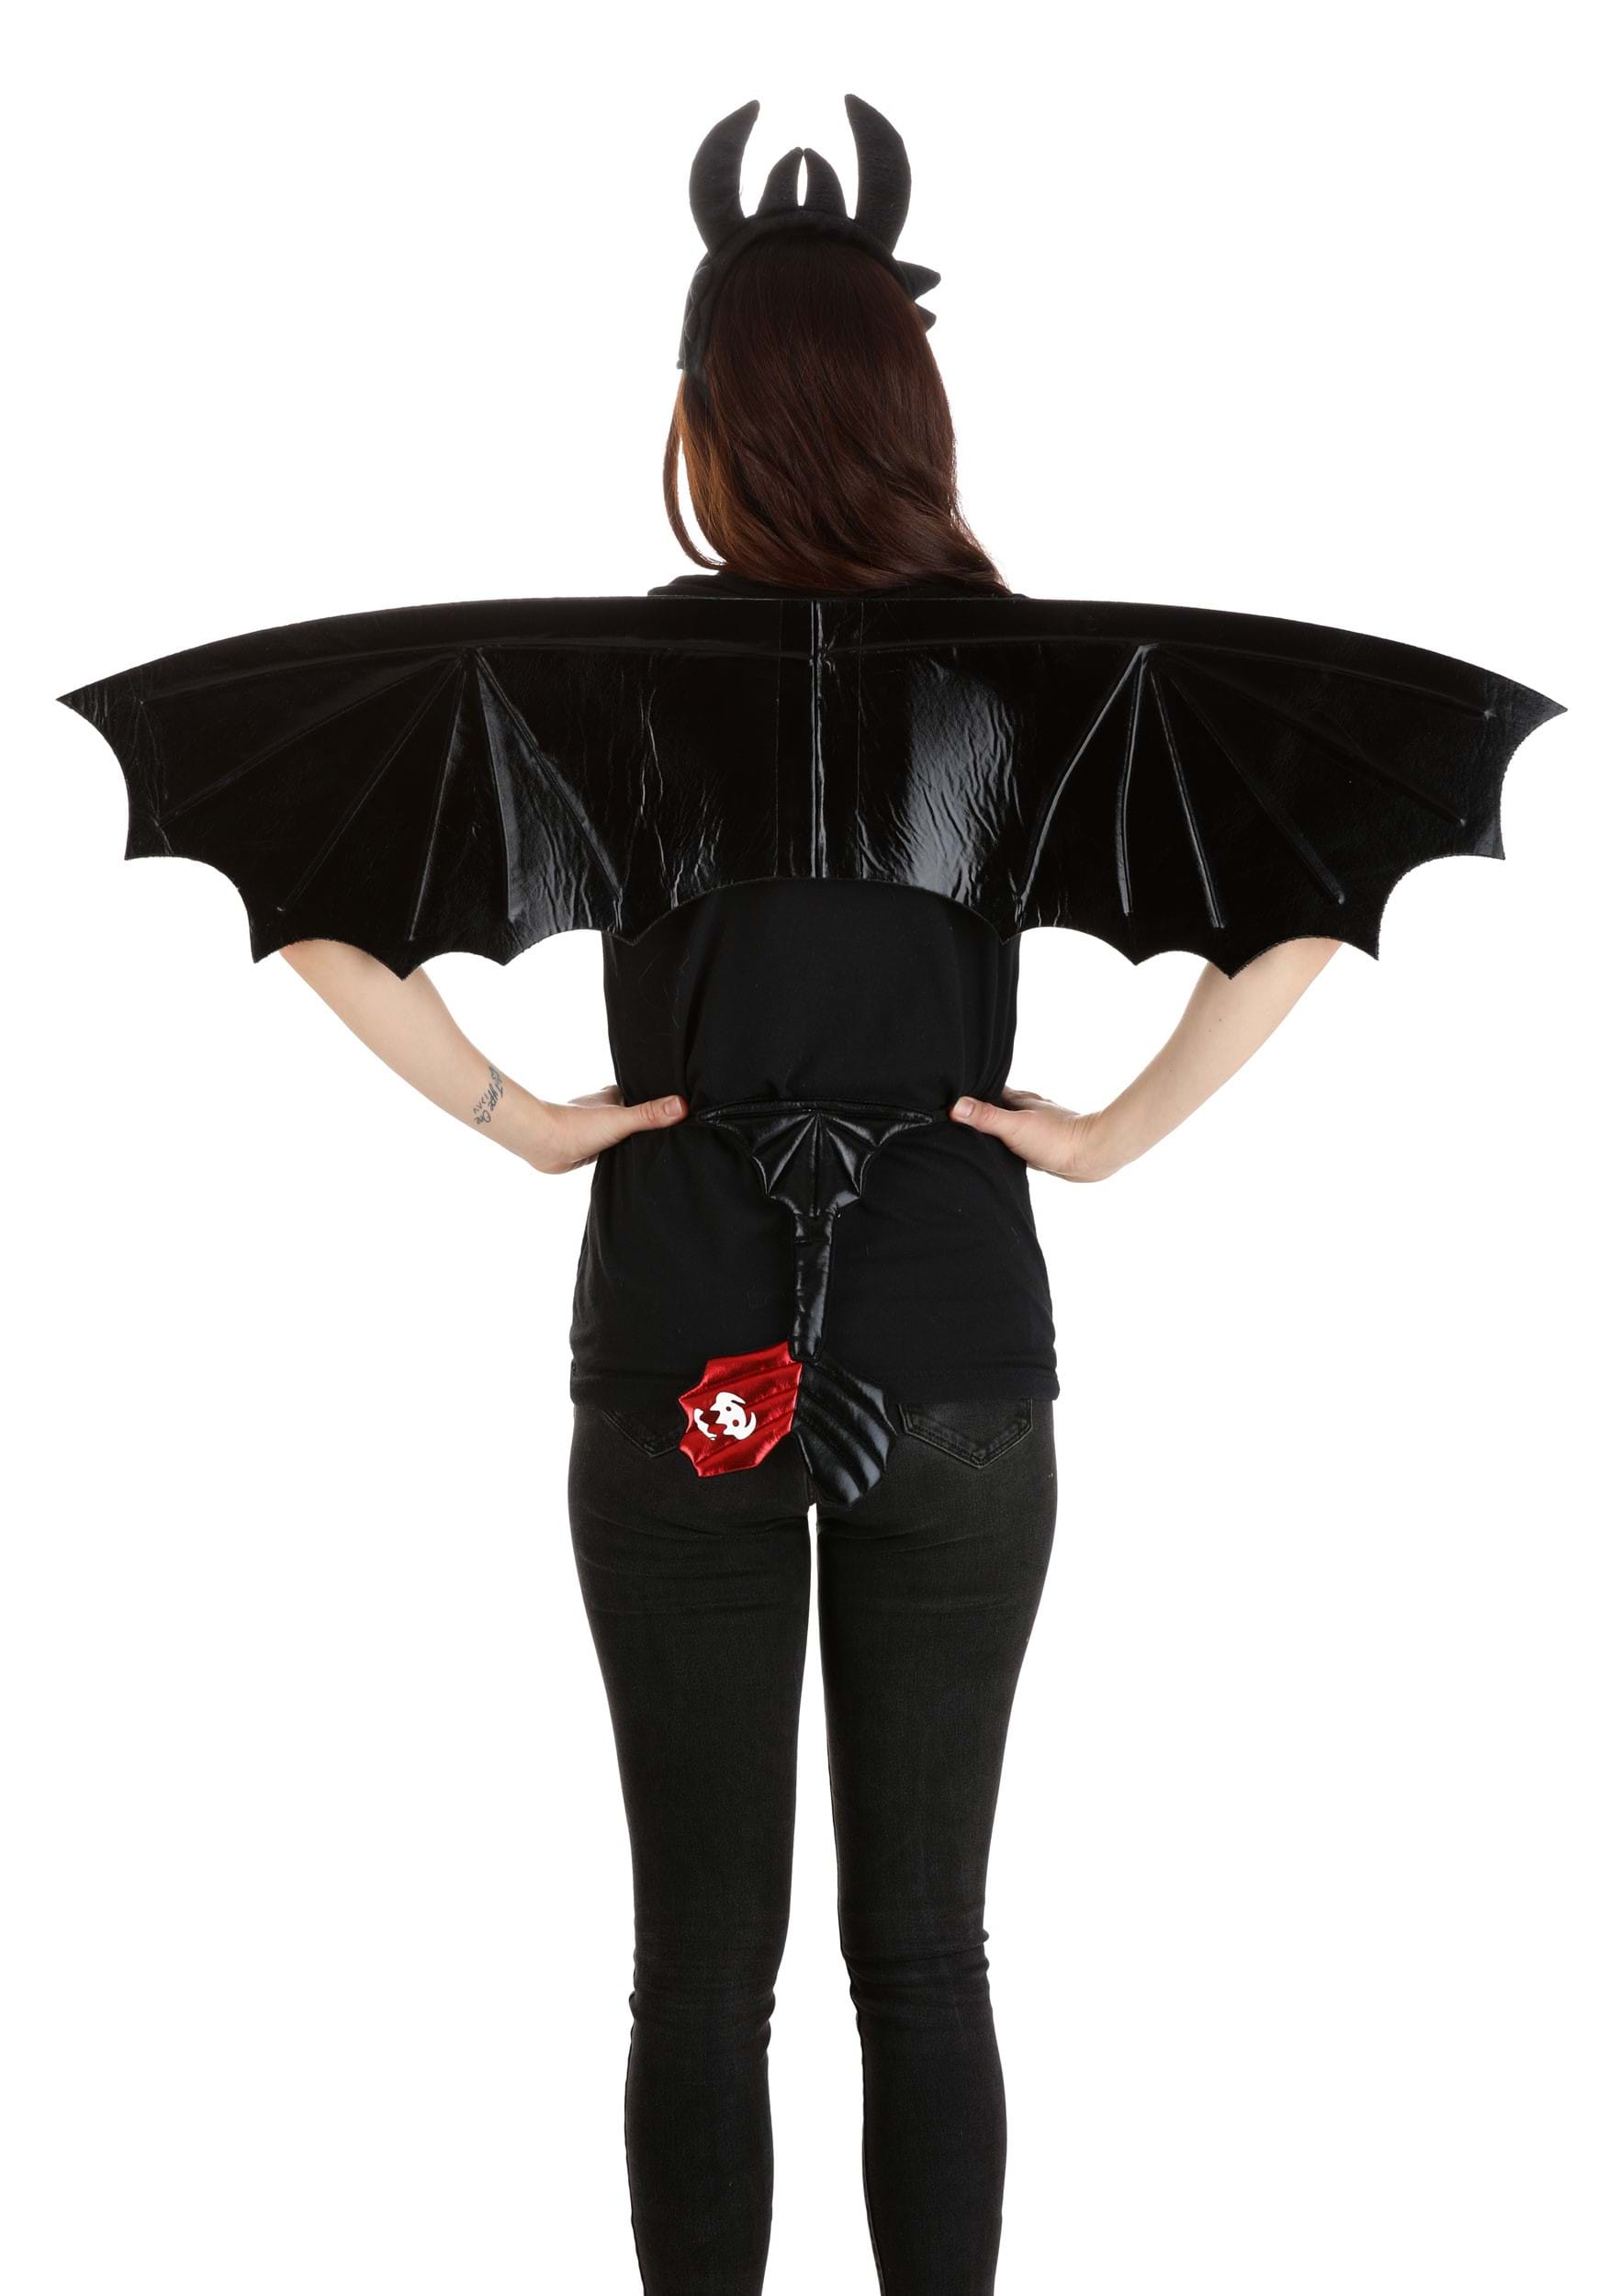 How To Train Your Dragon Toothless Fancy Dress Costume Accessory Kit